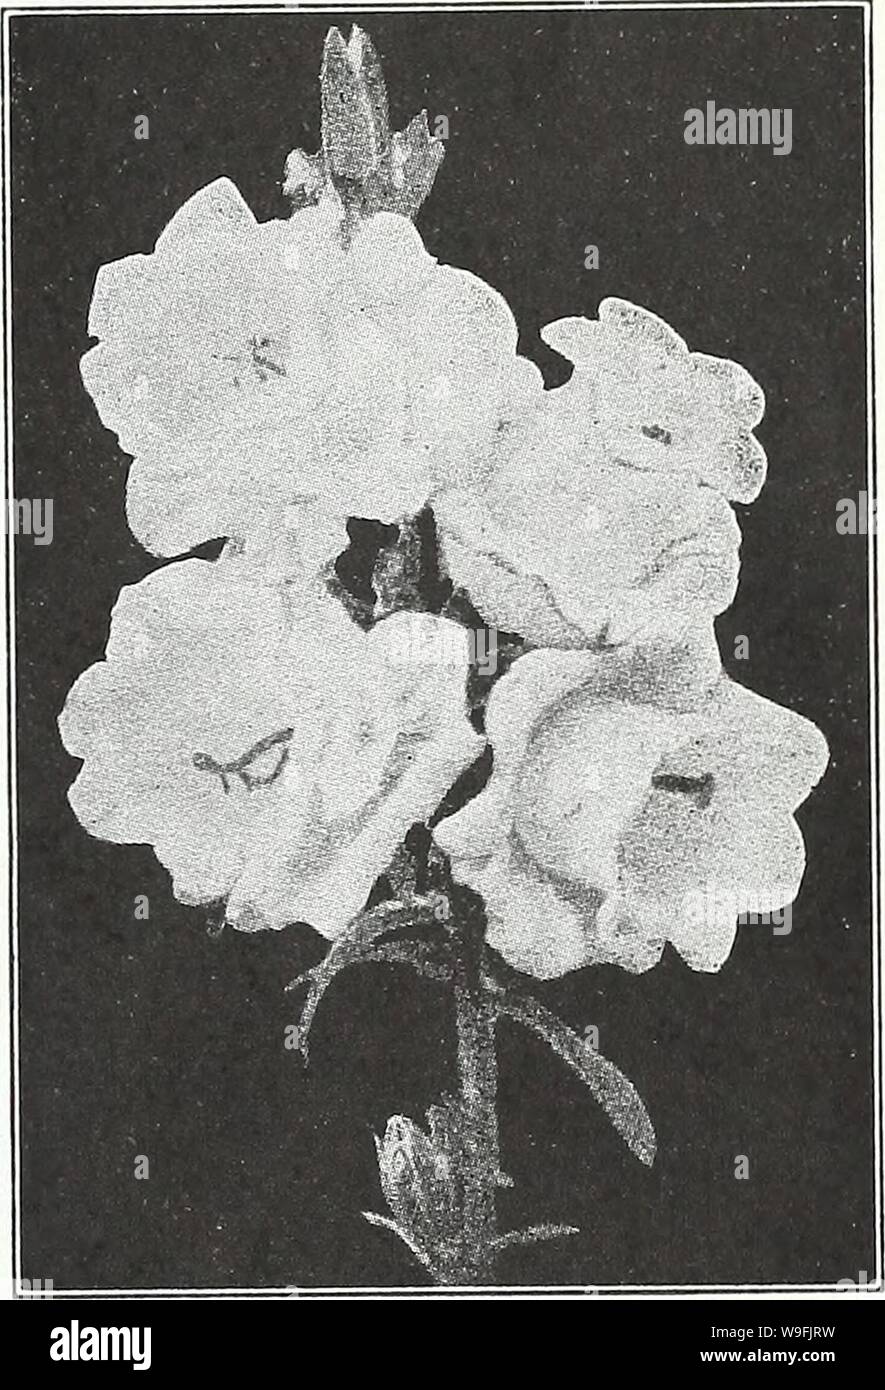 Archive image from page 48 of Currie's garden annual  62nd. Currie's garden annual : 62nd year spring 1937  curriesgardenann19curr 3 Year: 1937 ( CURRIE BROTHERS CO., MILWAUKEE, WIS Page 45 BOLTONIA (False Chamonile) Showy plants, bearing single aster-like flowers in great abundance. ASTEROIDES—Pure white. LATISQUAMA—Lavender pink. Plants, price, each, 25c; per doz $2.50 BUDDLEIA (Butterfly Bush, or Summer Lilac) MAGNIFICA—The finest variety, with large spikes of dark blue flowers. Plants, price, each, 50c: per doz $5.00 HARDY BORDER CARNATION Perennial varieties blooming from the seed the sec Stock Photo